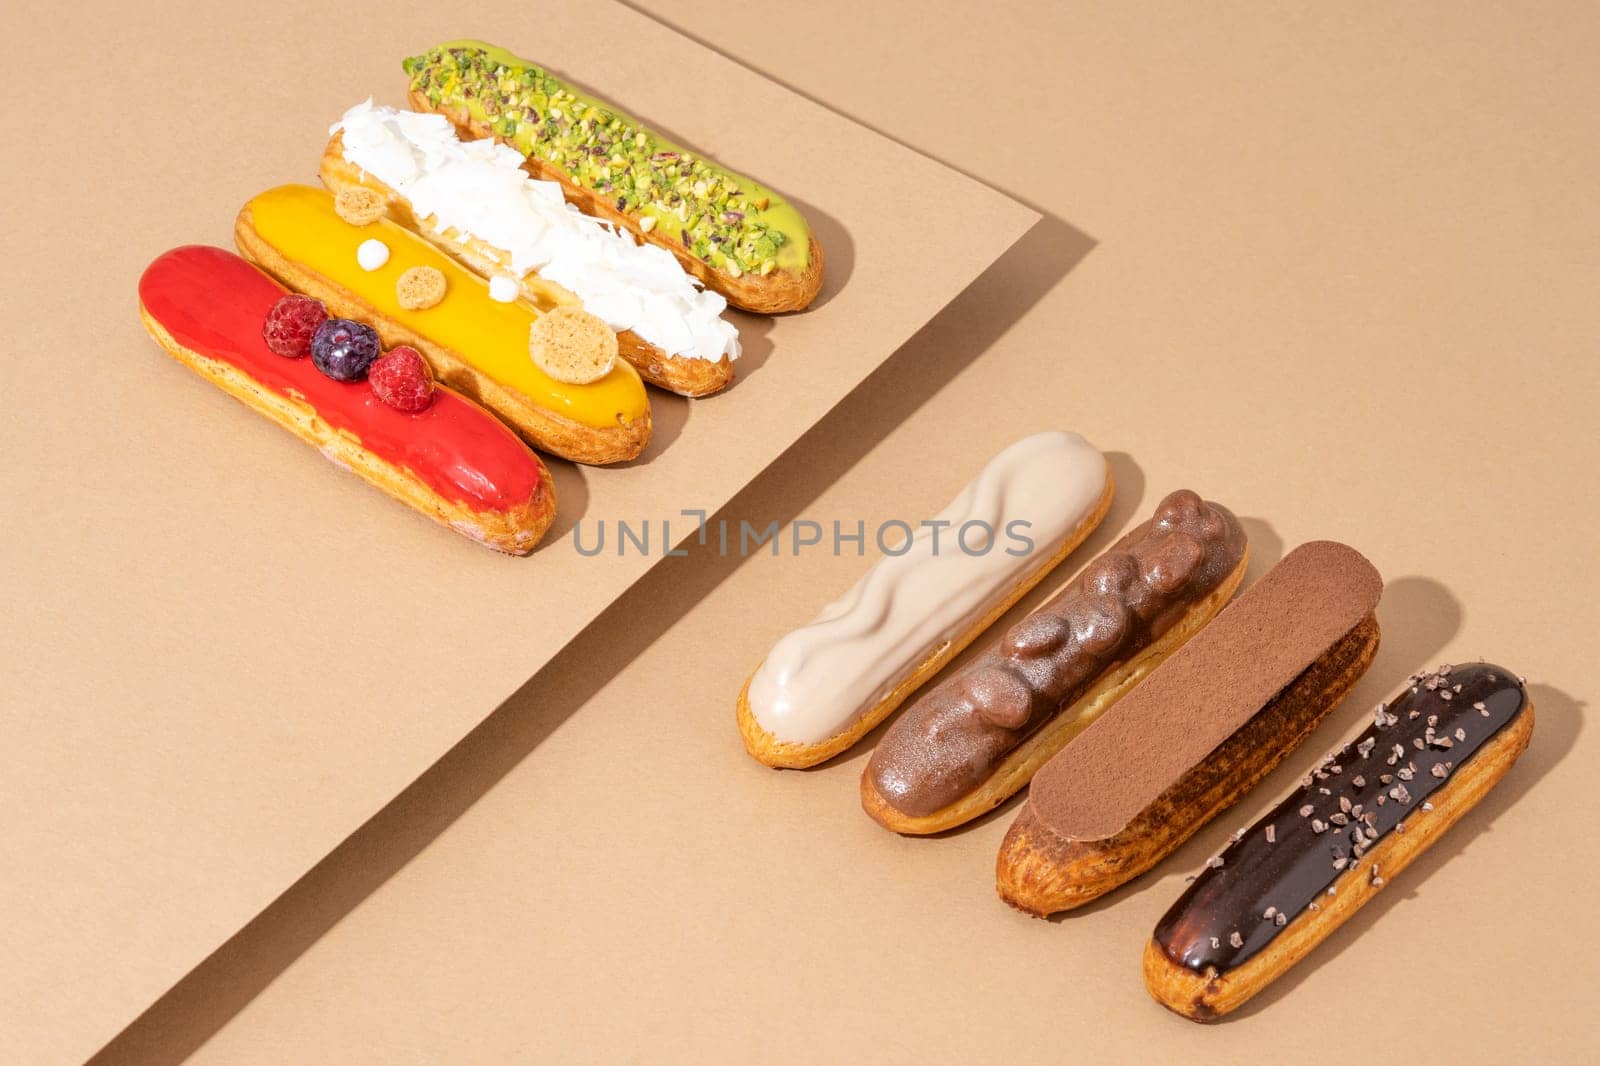 A set of delicious glazed donuts in a variety of flavors, arranged on a cardboard paper in an inviting display by A_Karim